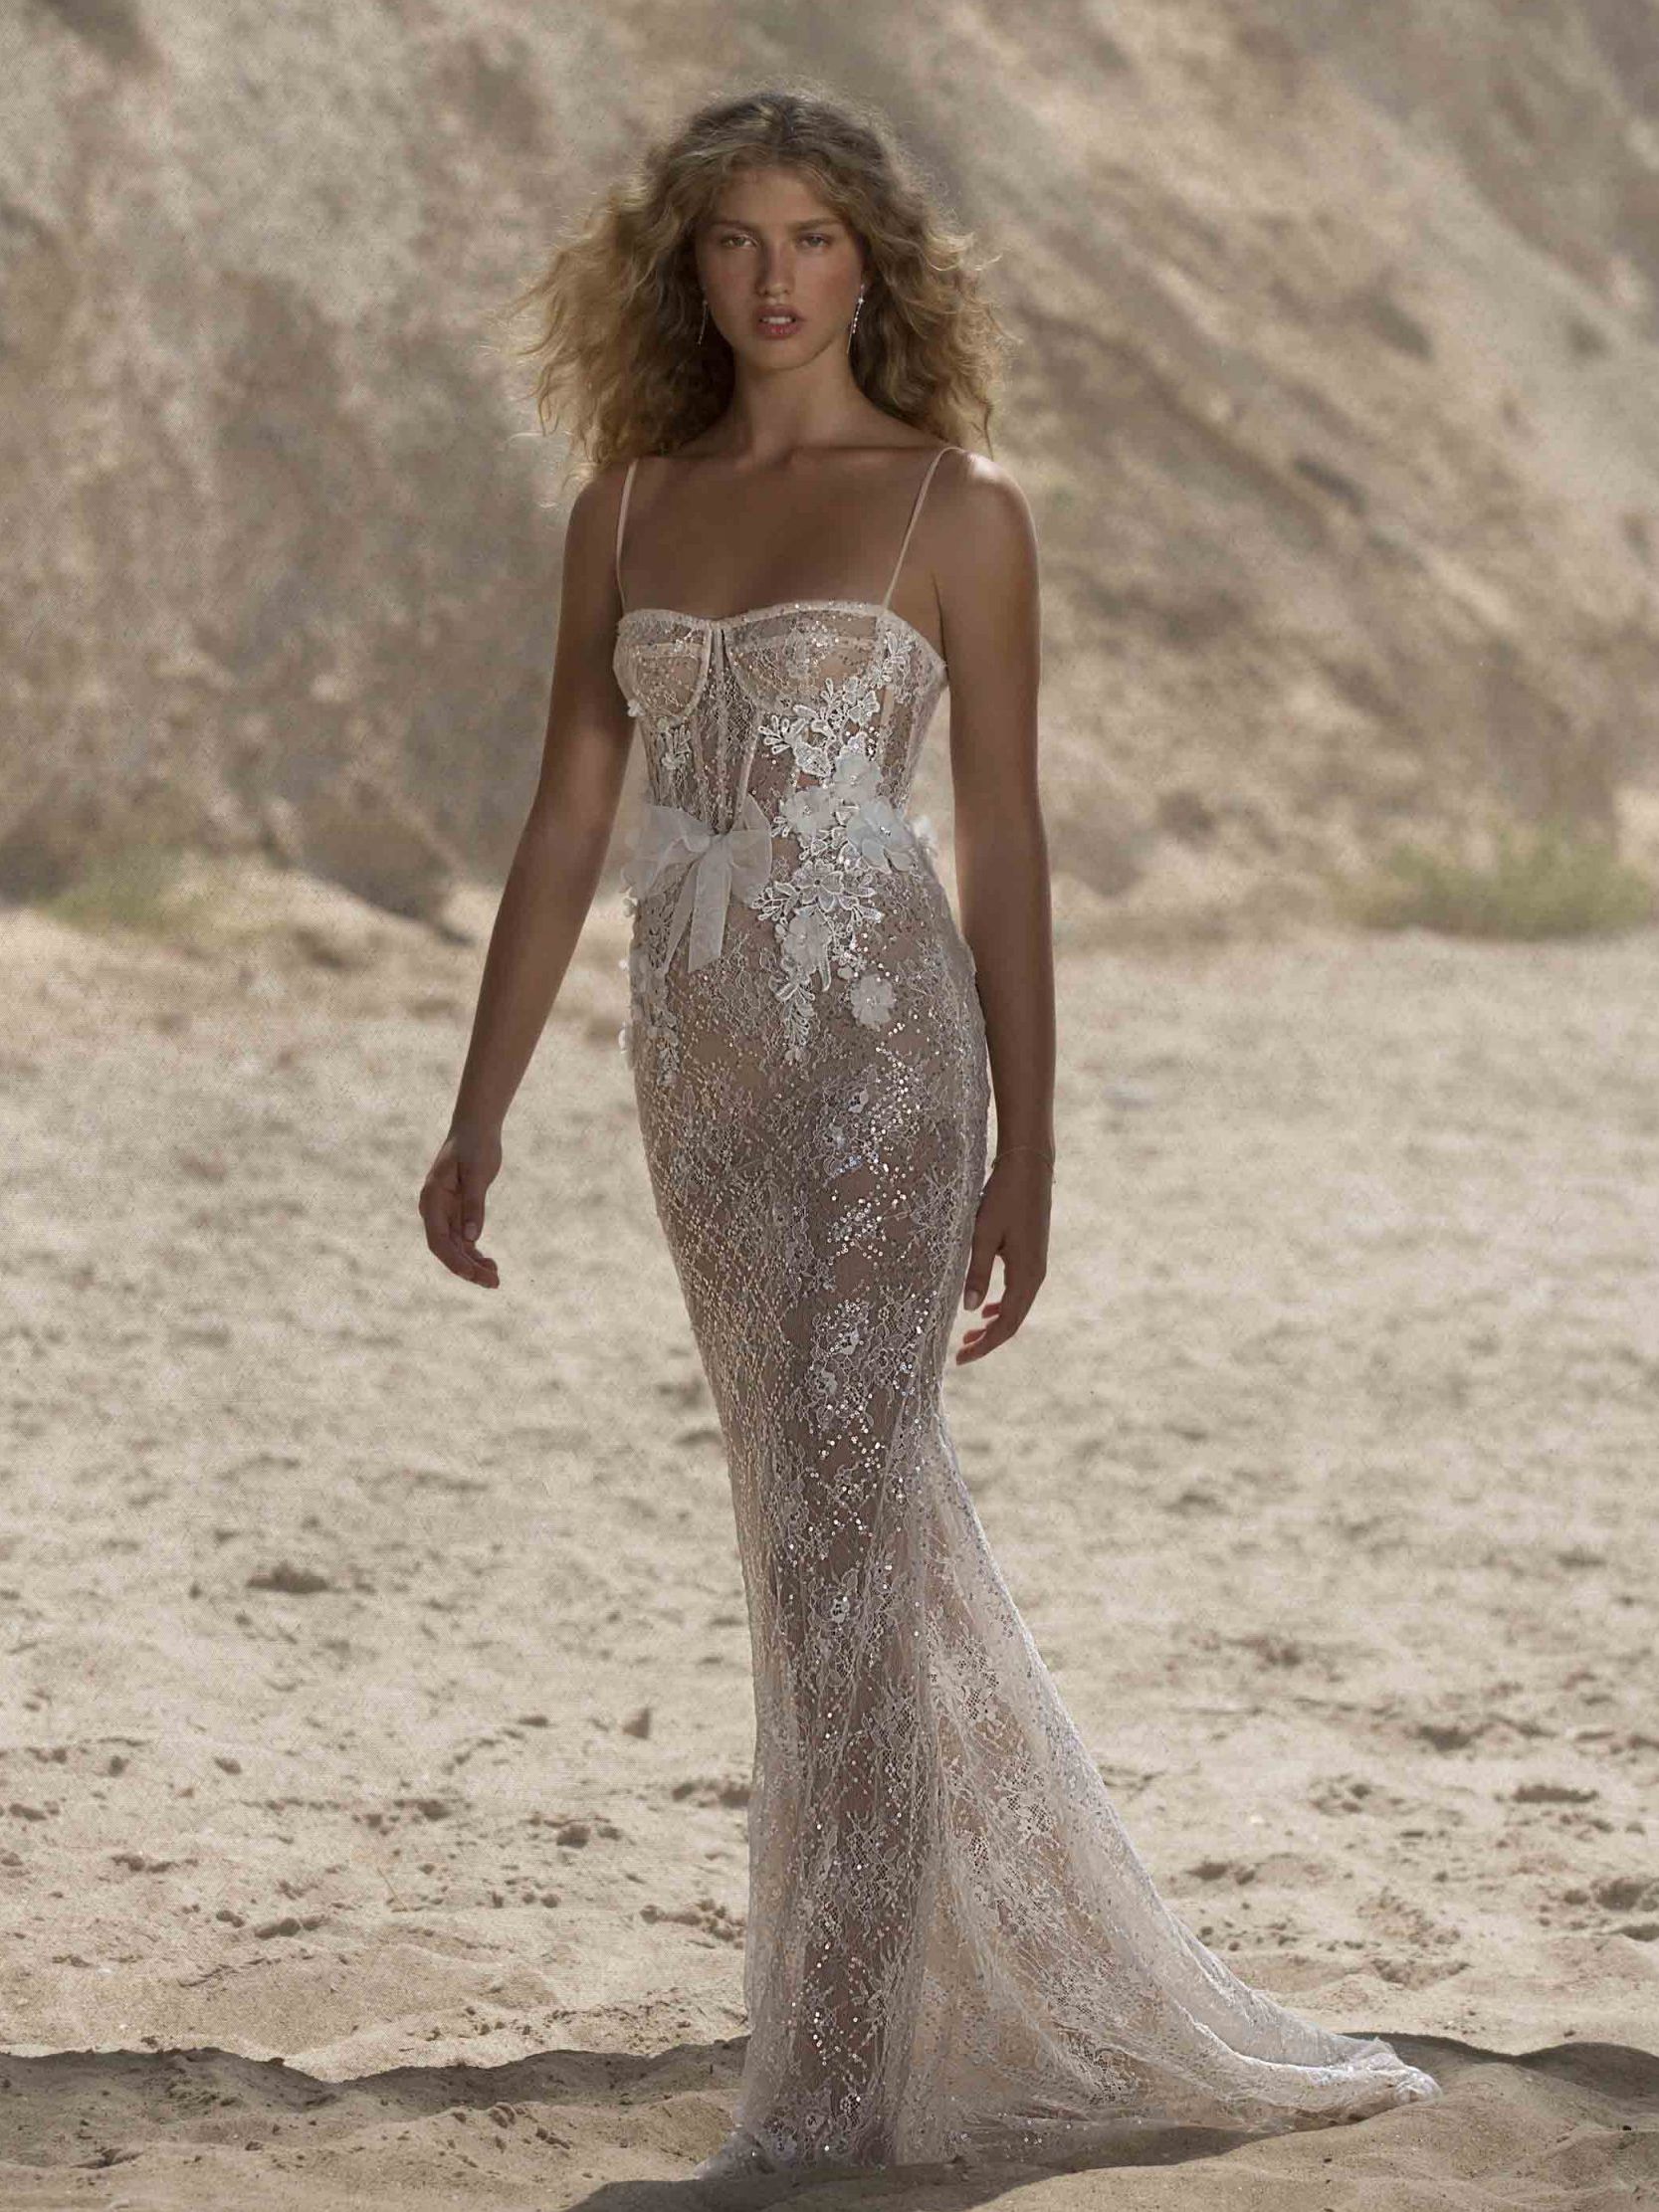 21-HOPE Bridal Dress Inspirated By Berta Muse 2021 Vista Mare Collection